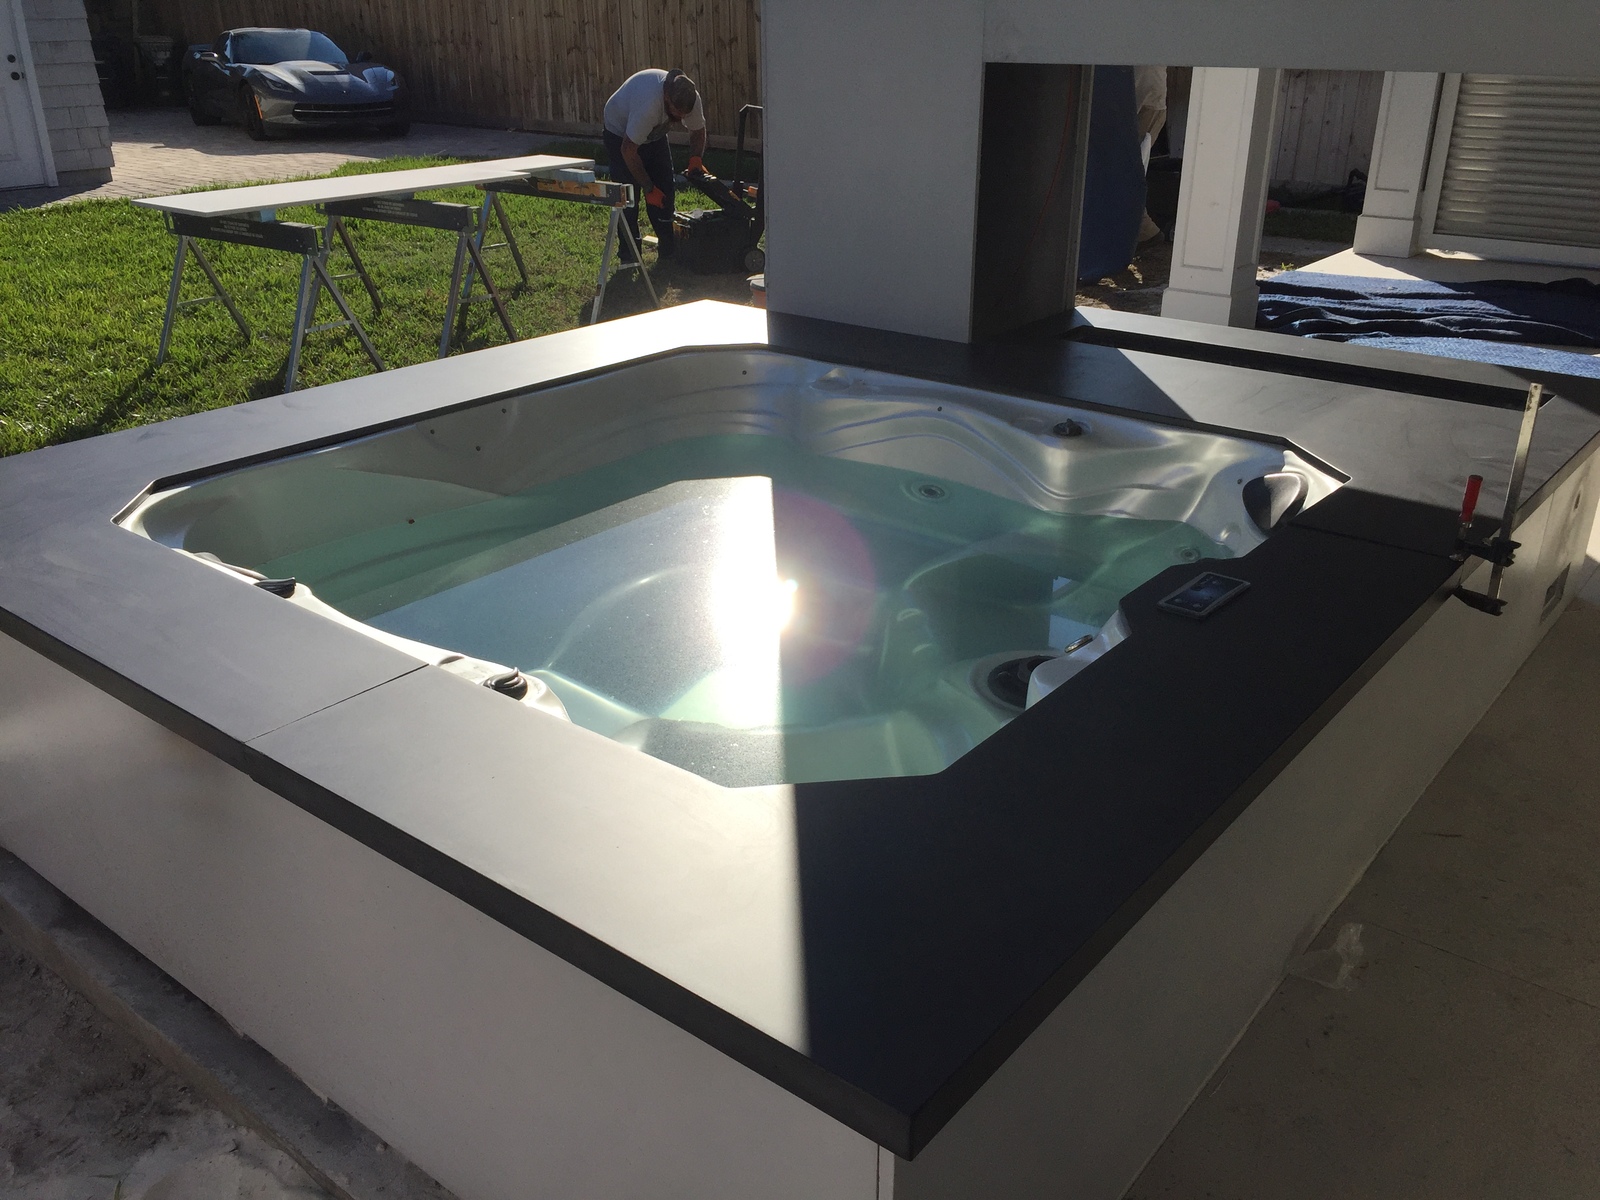 Wrapped Hotub with Comcrete Surround and Tops Caps